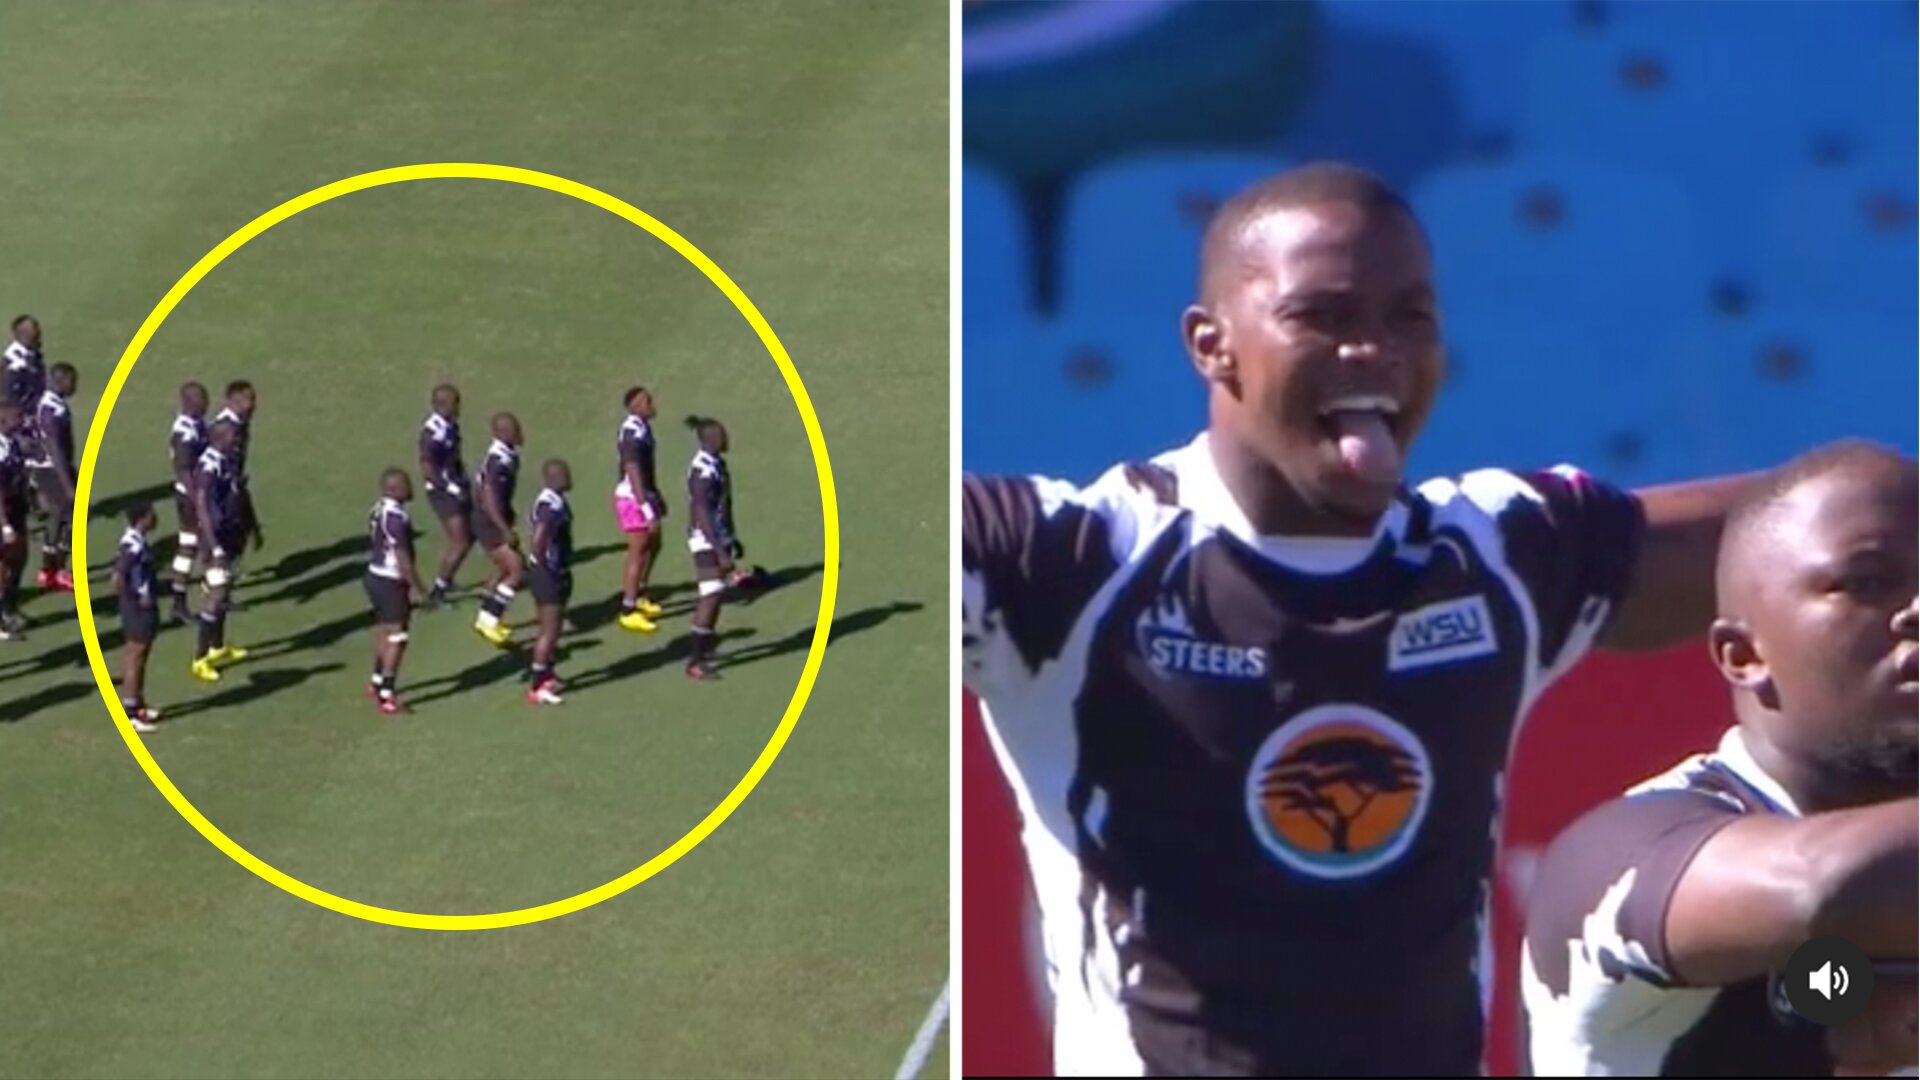 Outrage among fans as South Africa varsity rugby team do their own haka